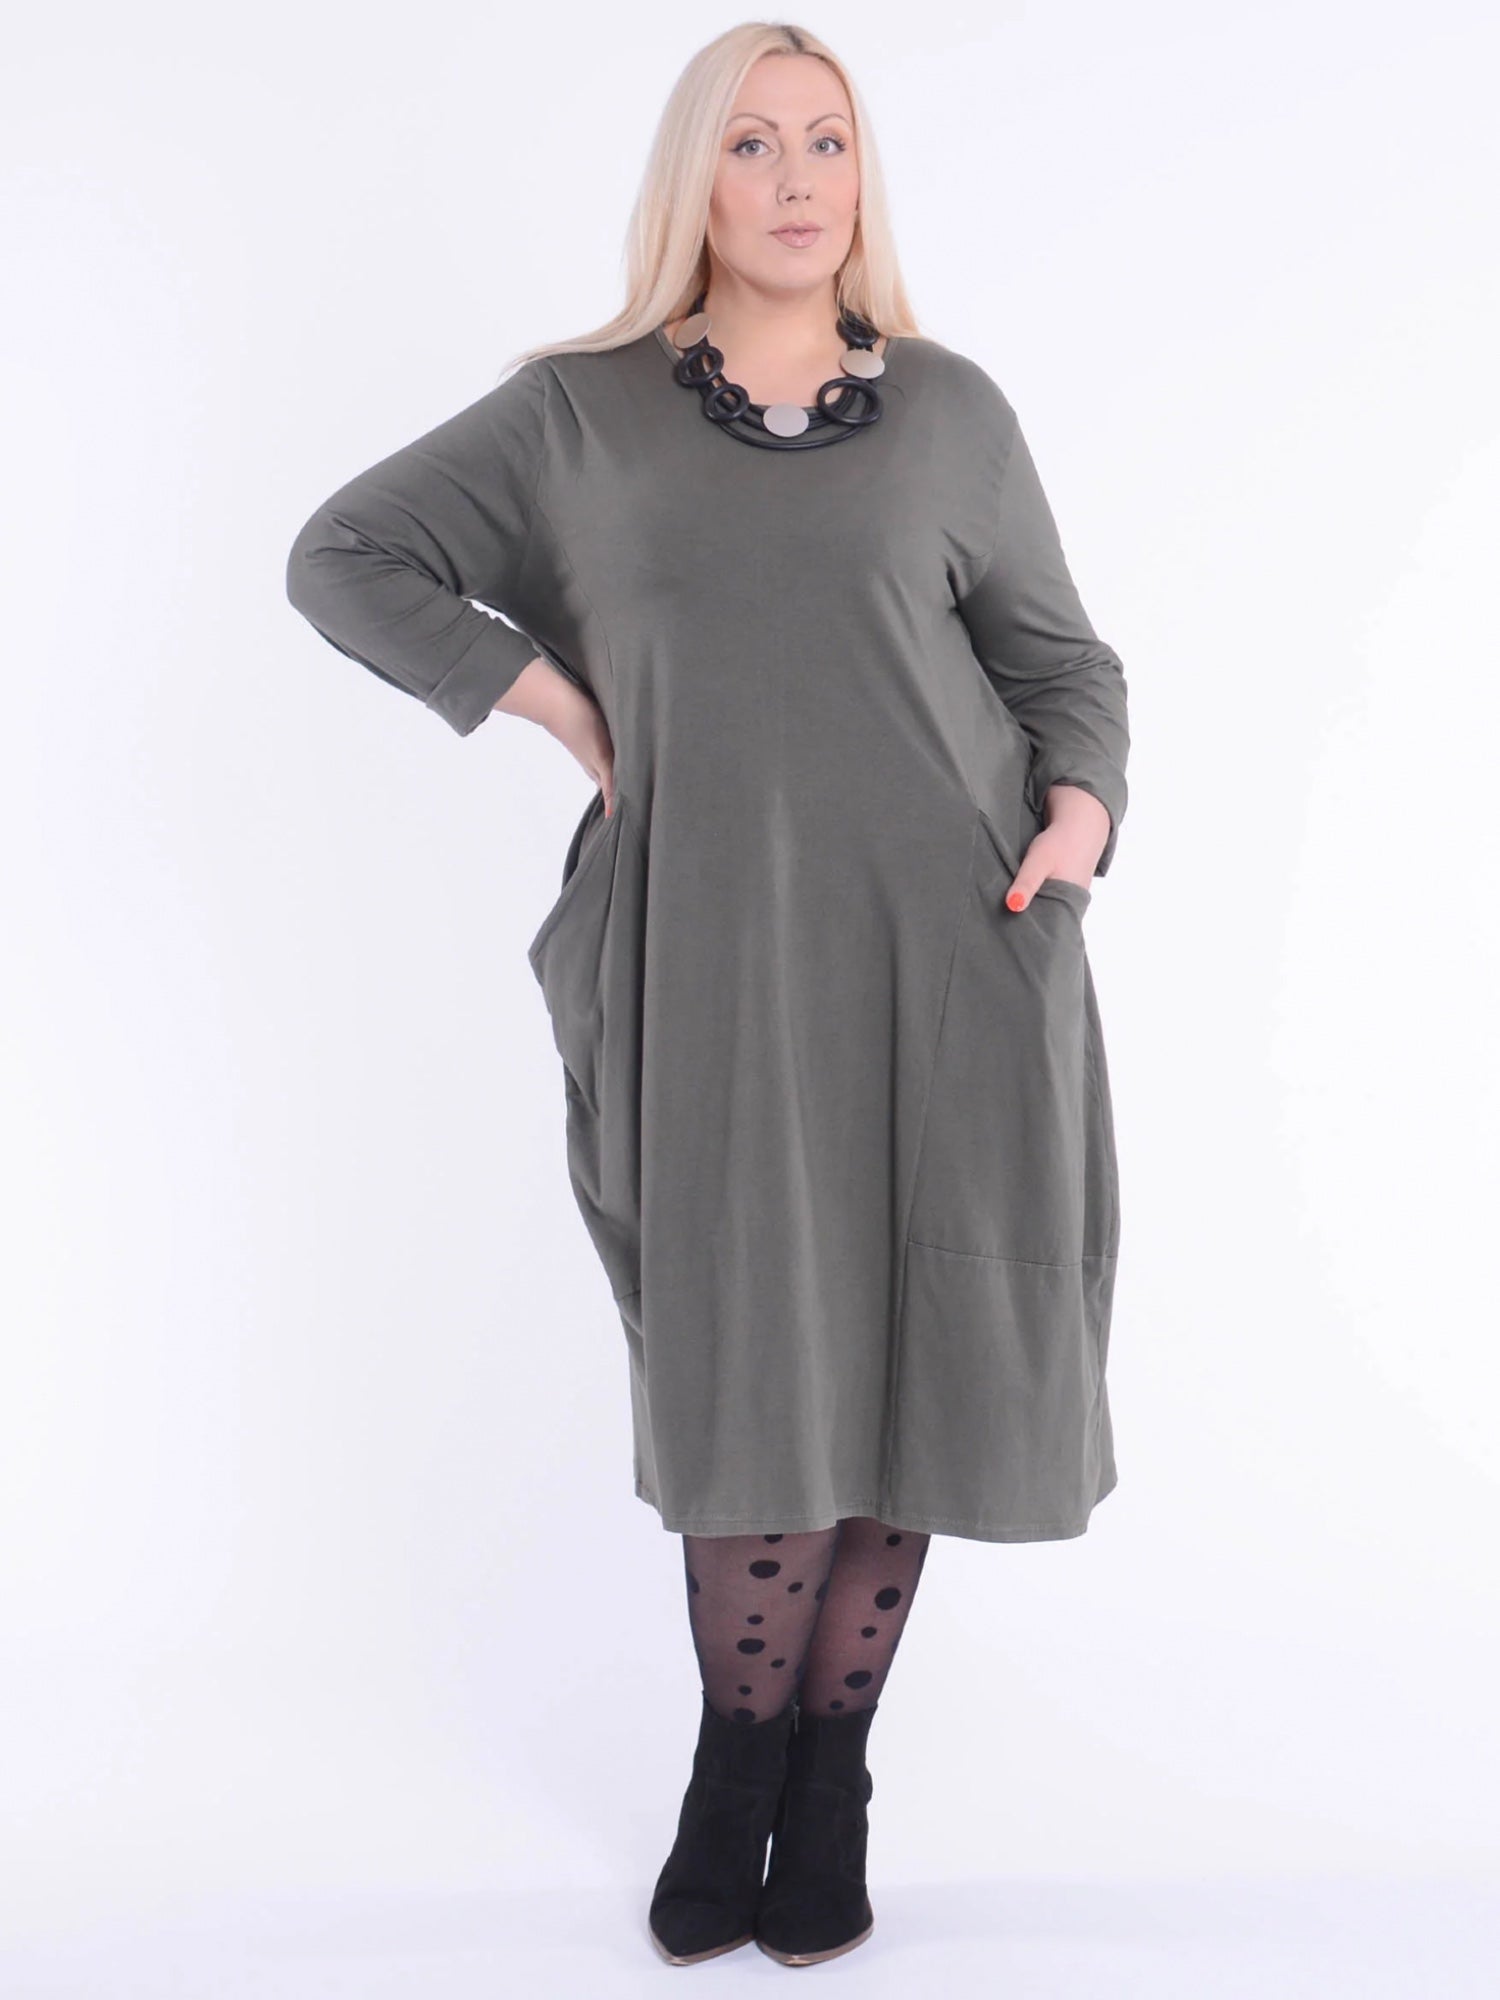 Lagenlook Parachute Dress With Pockets Cotton - 9451C, Dresses, Pure Plus Clothing, Lagenlook Clothing, Plus Size Fashion, Over 50 Fashion